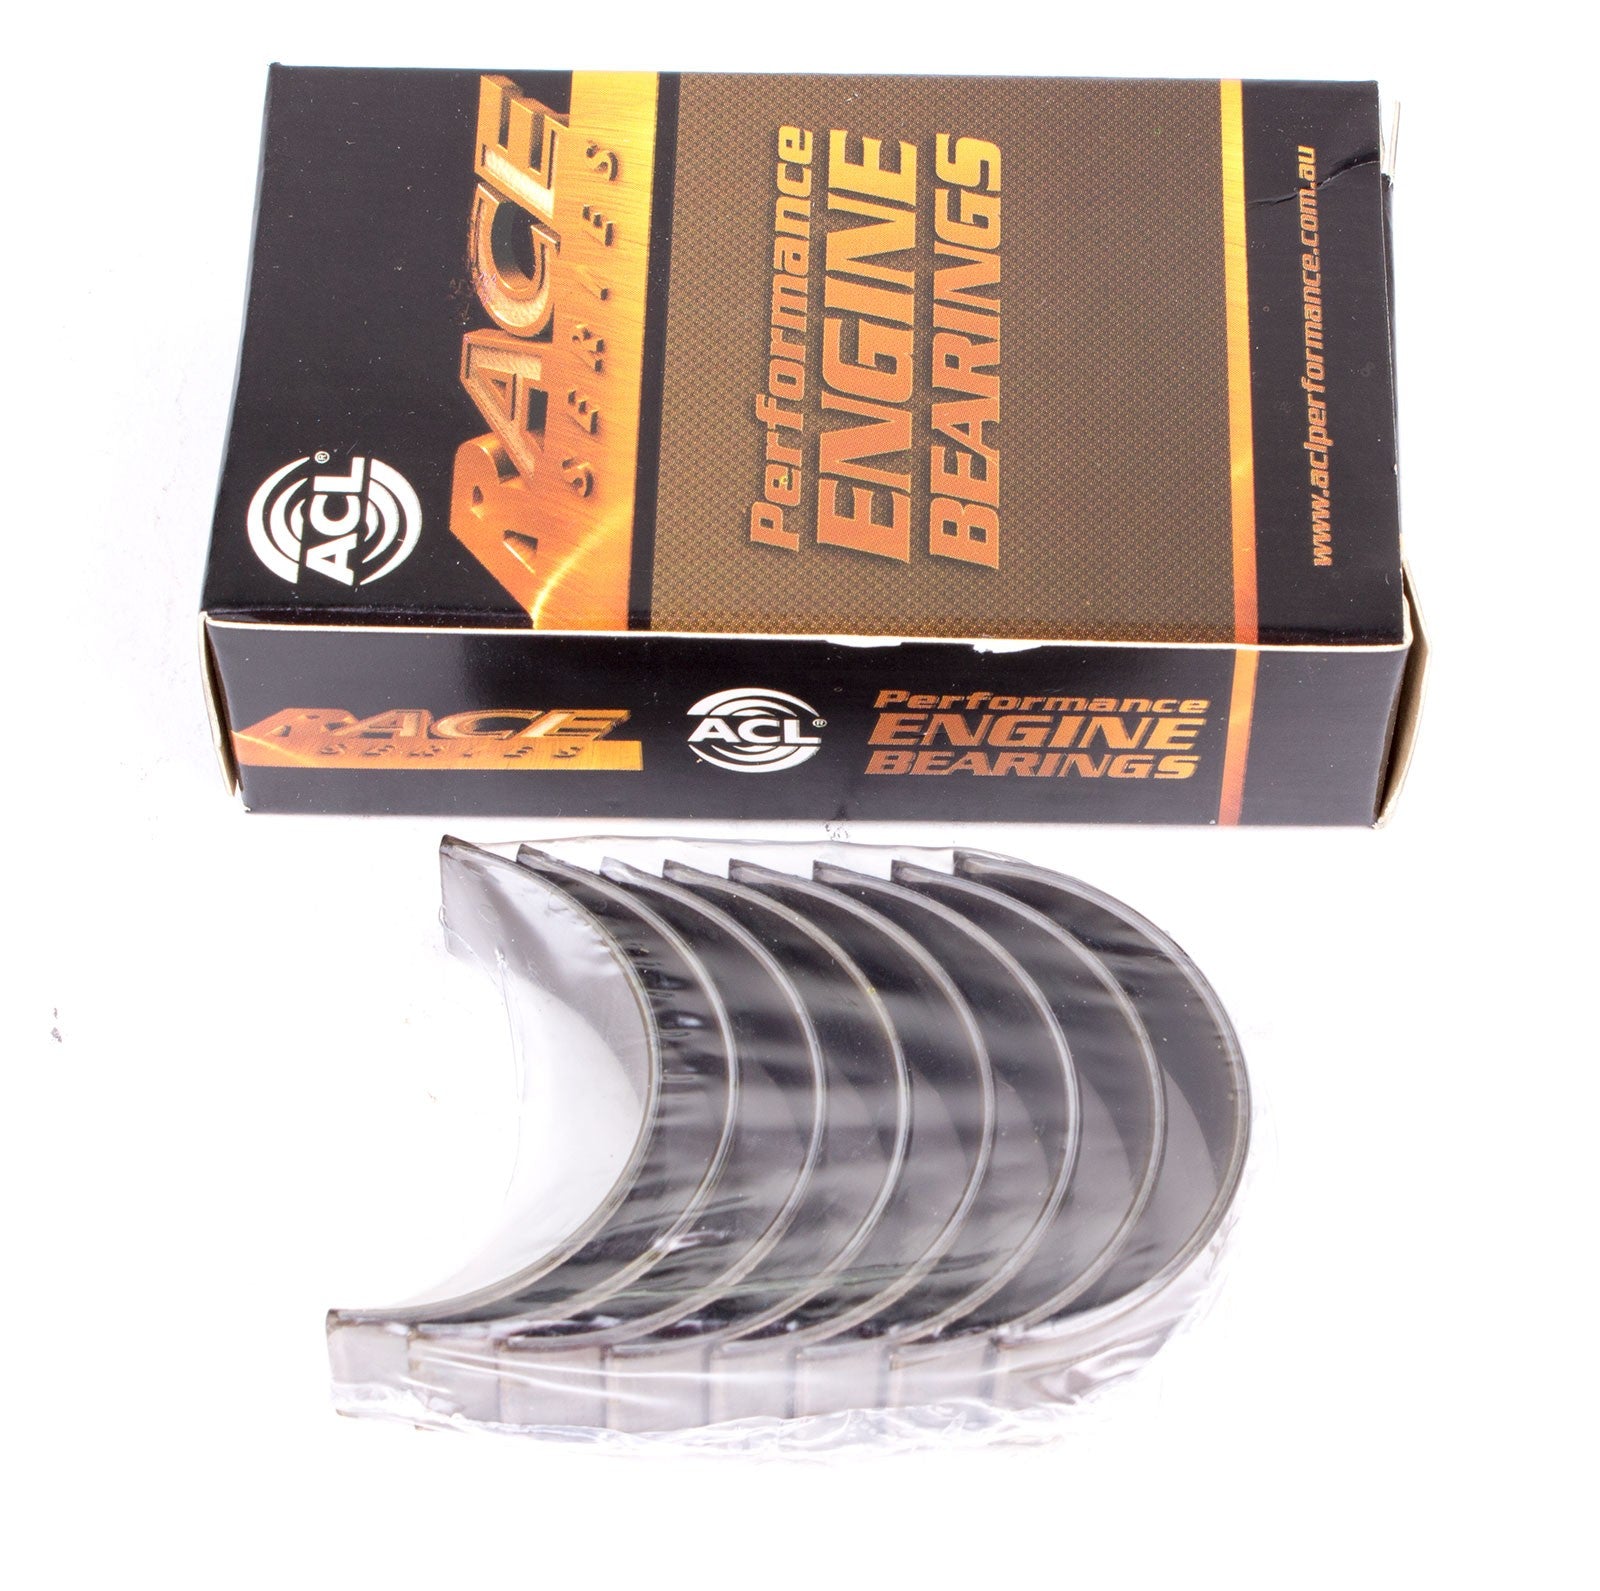 ACL 5M1039H-01 Main bearing set (ACL Race Series) Photo-0 